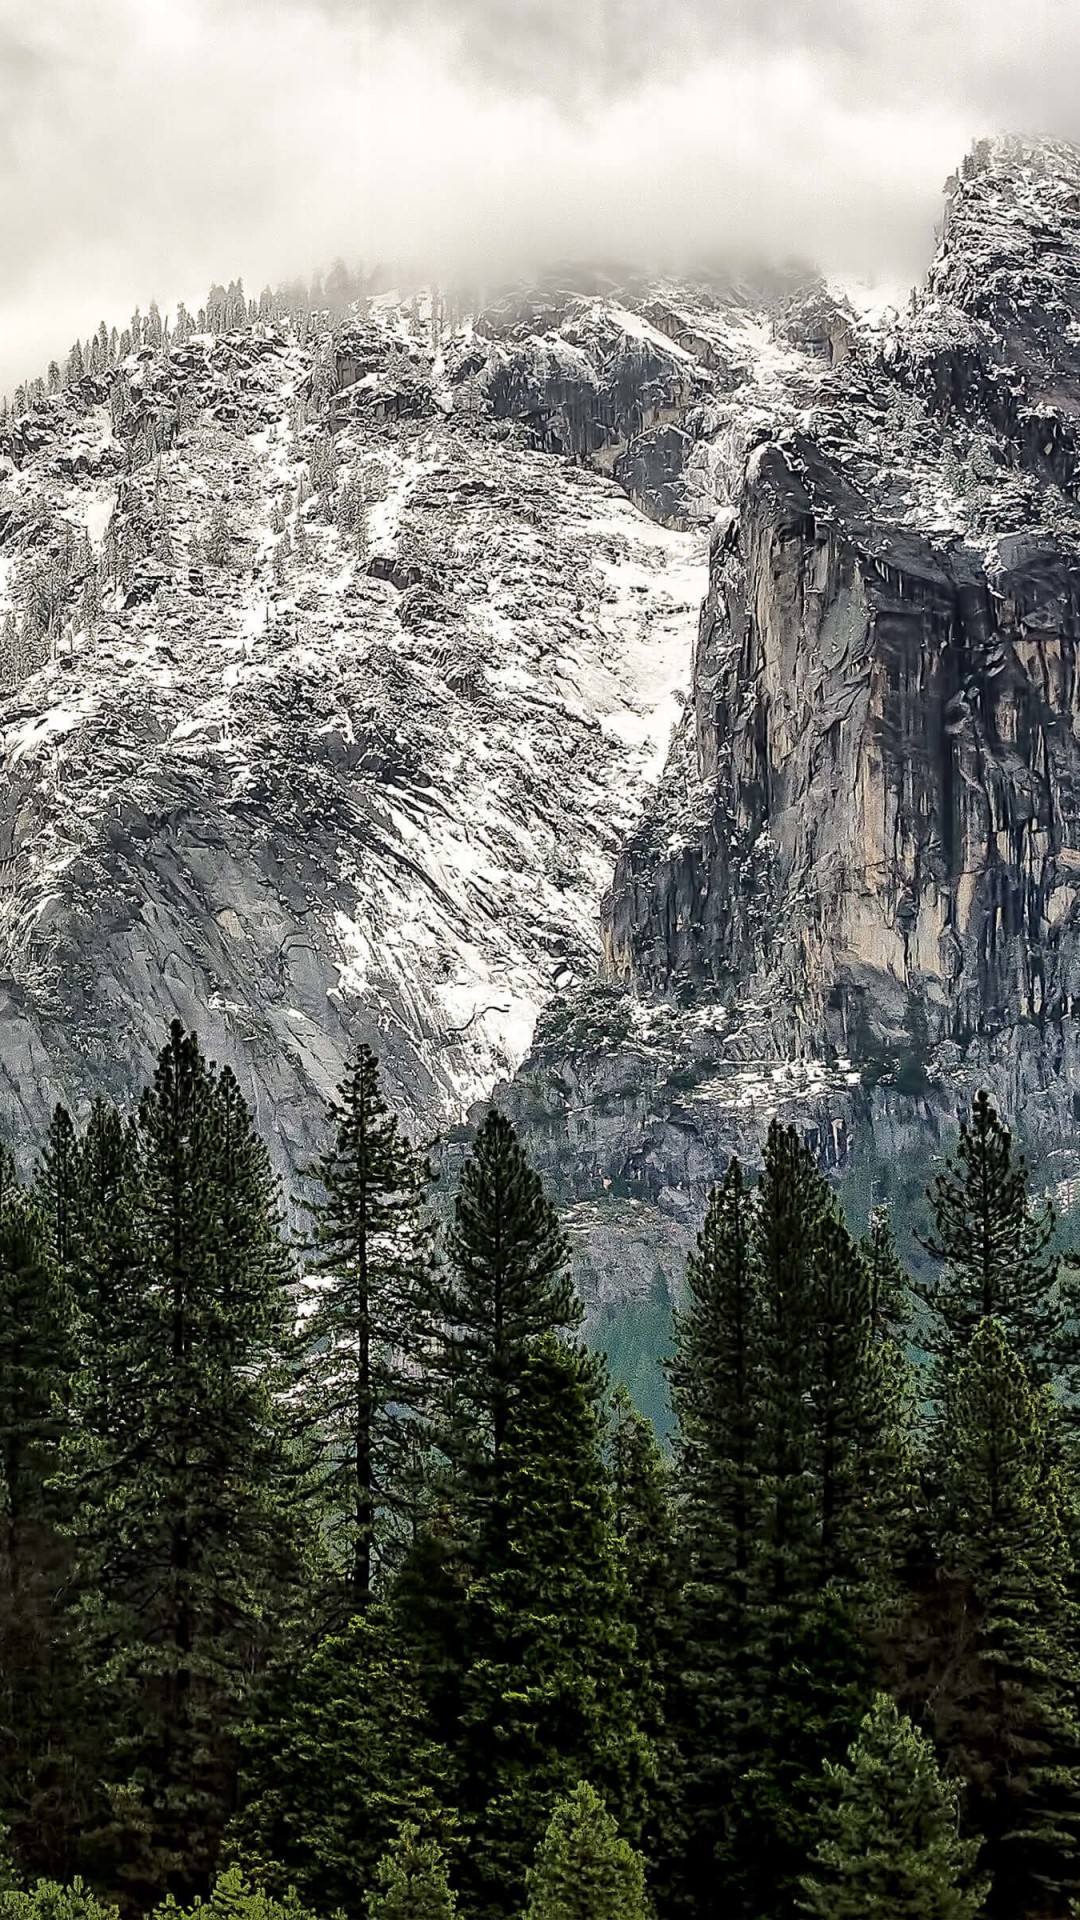 Winter Day at Yosemite National Park Wallpaper for SONY Xperia Z2